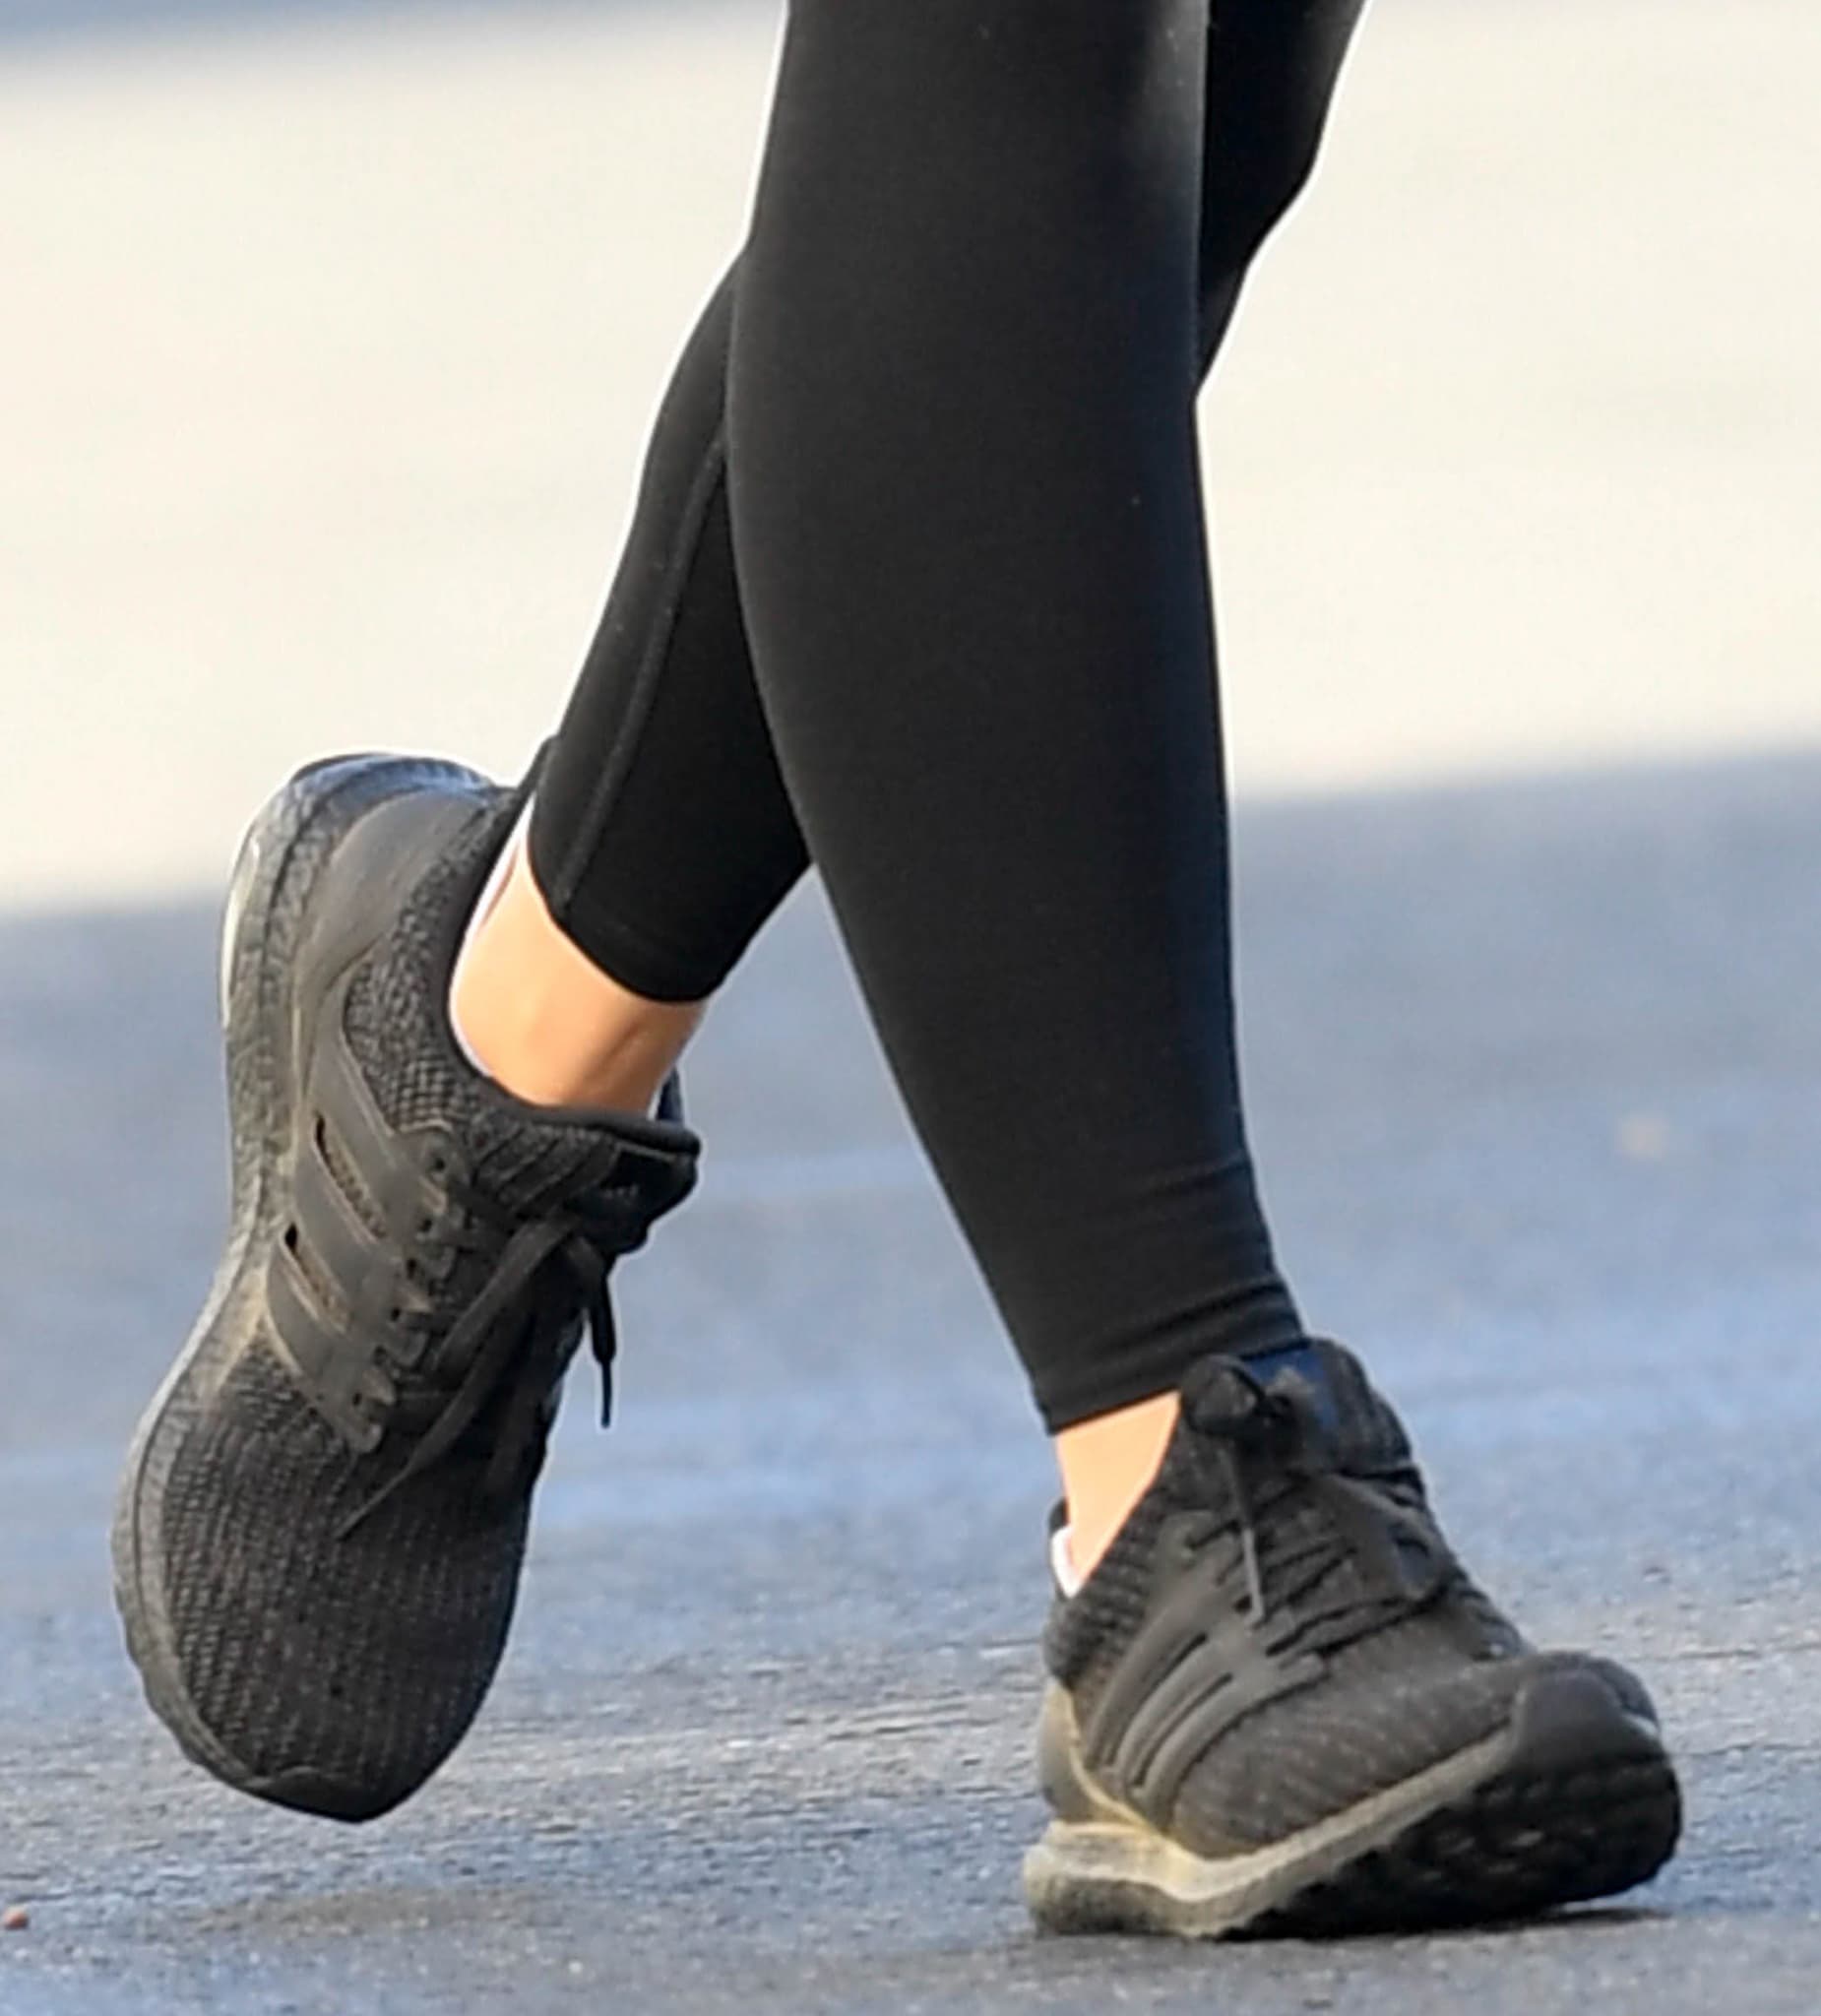 Olivia Wilde completes her athletic outfit with Adidas Ultraboost sneakers